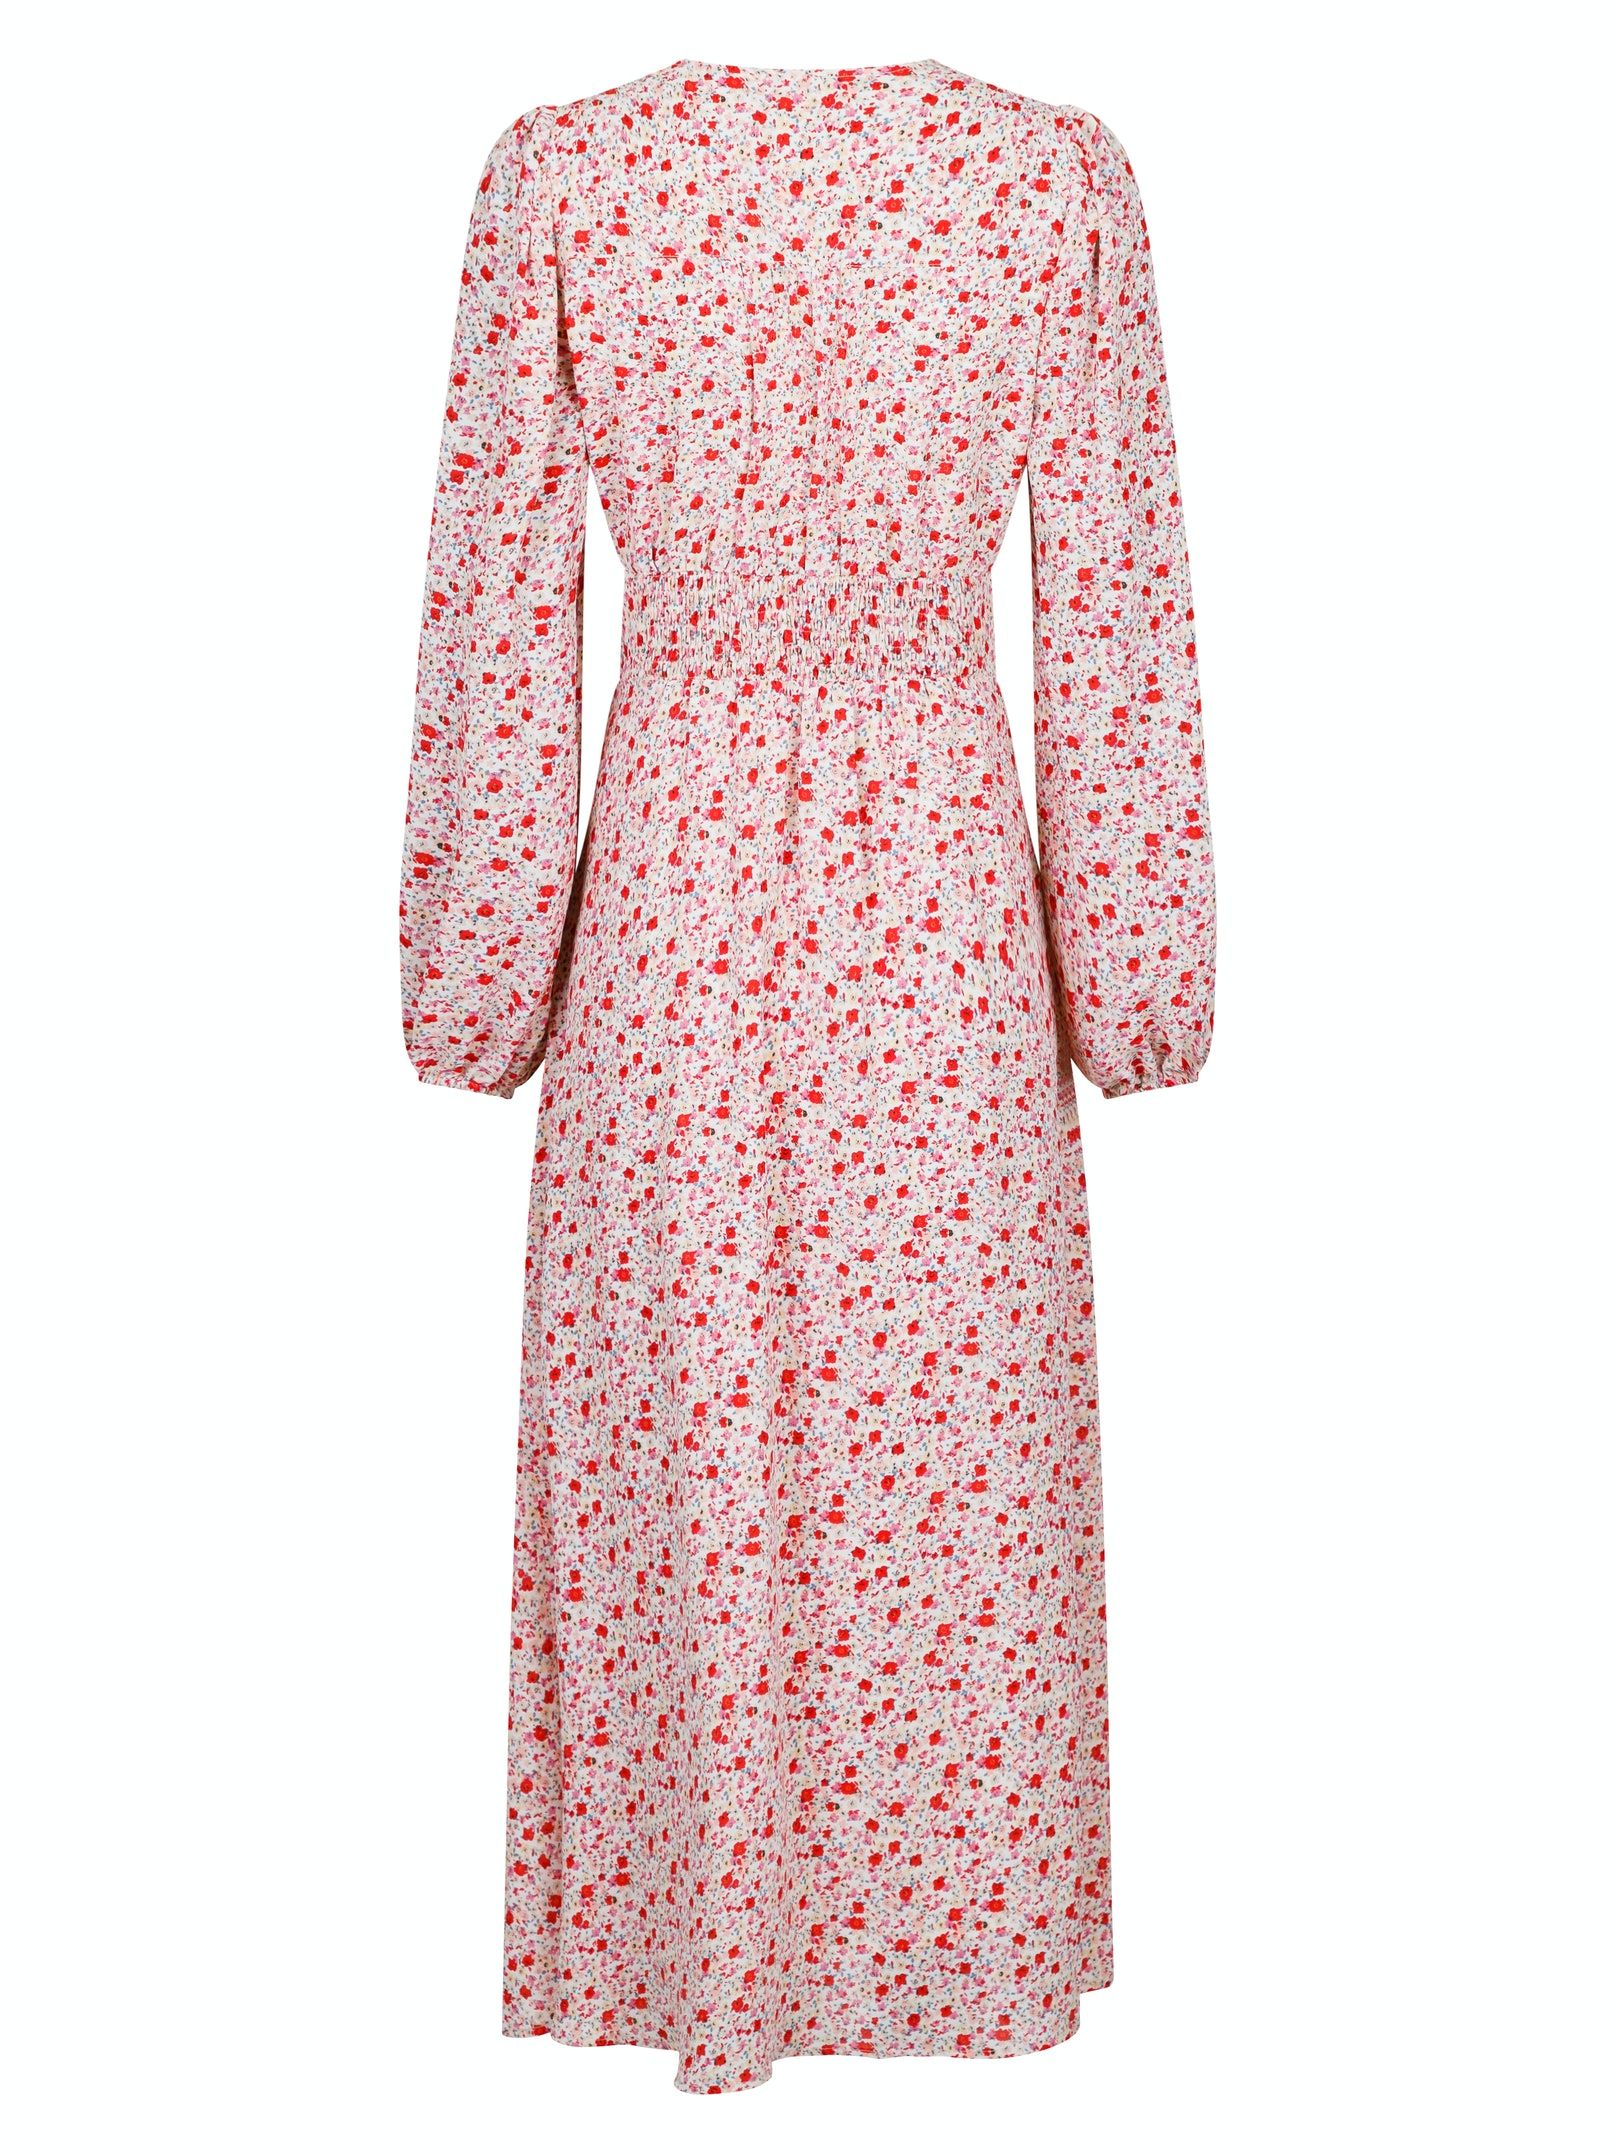 Timma Sweet Floral Dress - Red